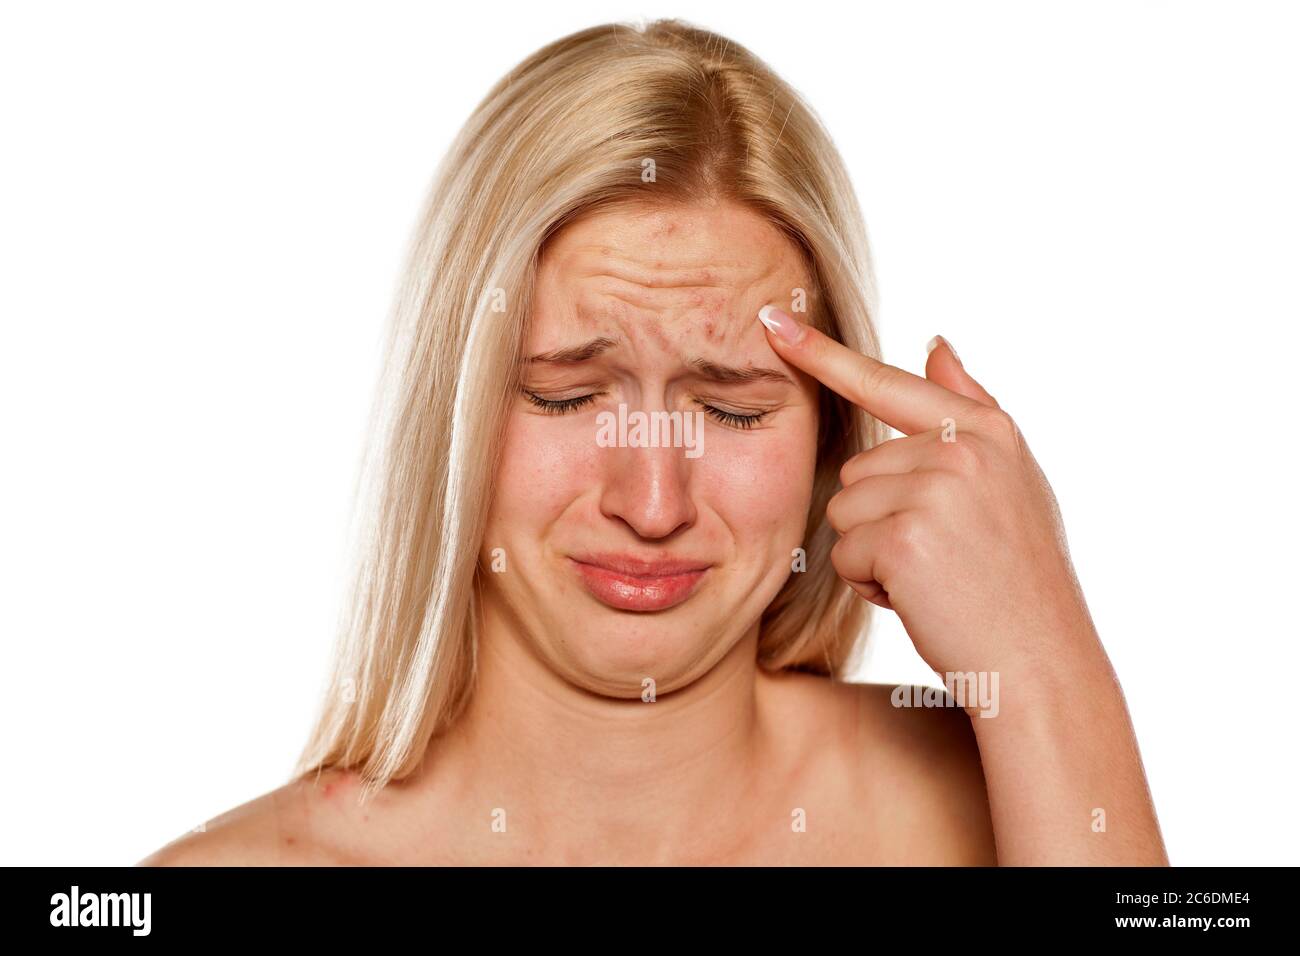 Sad blonde with pimples on her forehead Stock Photo